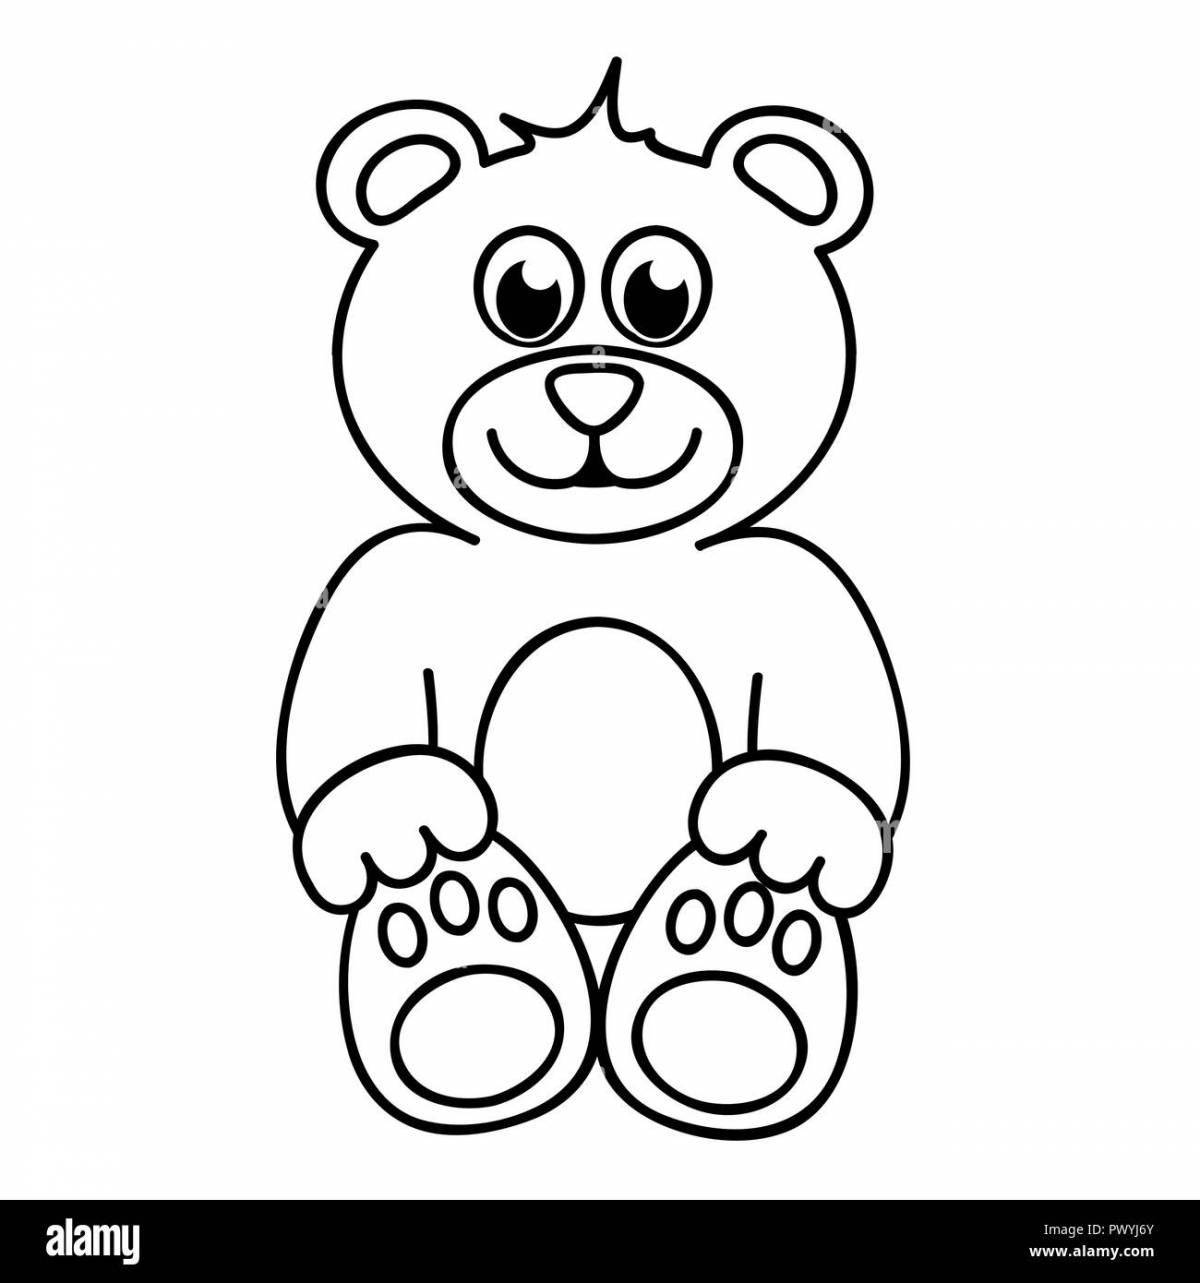 Live teddy bear coloring book for 2-3 year olds